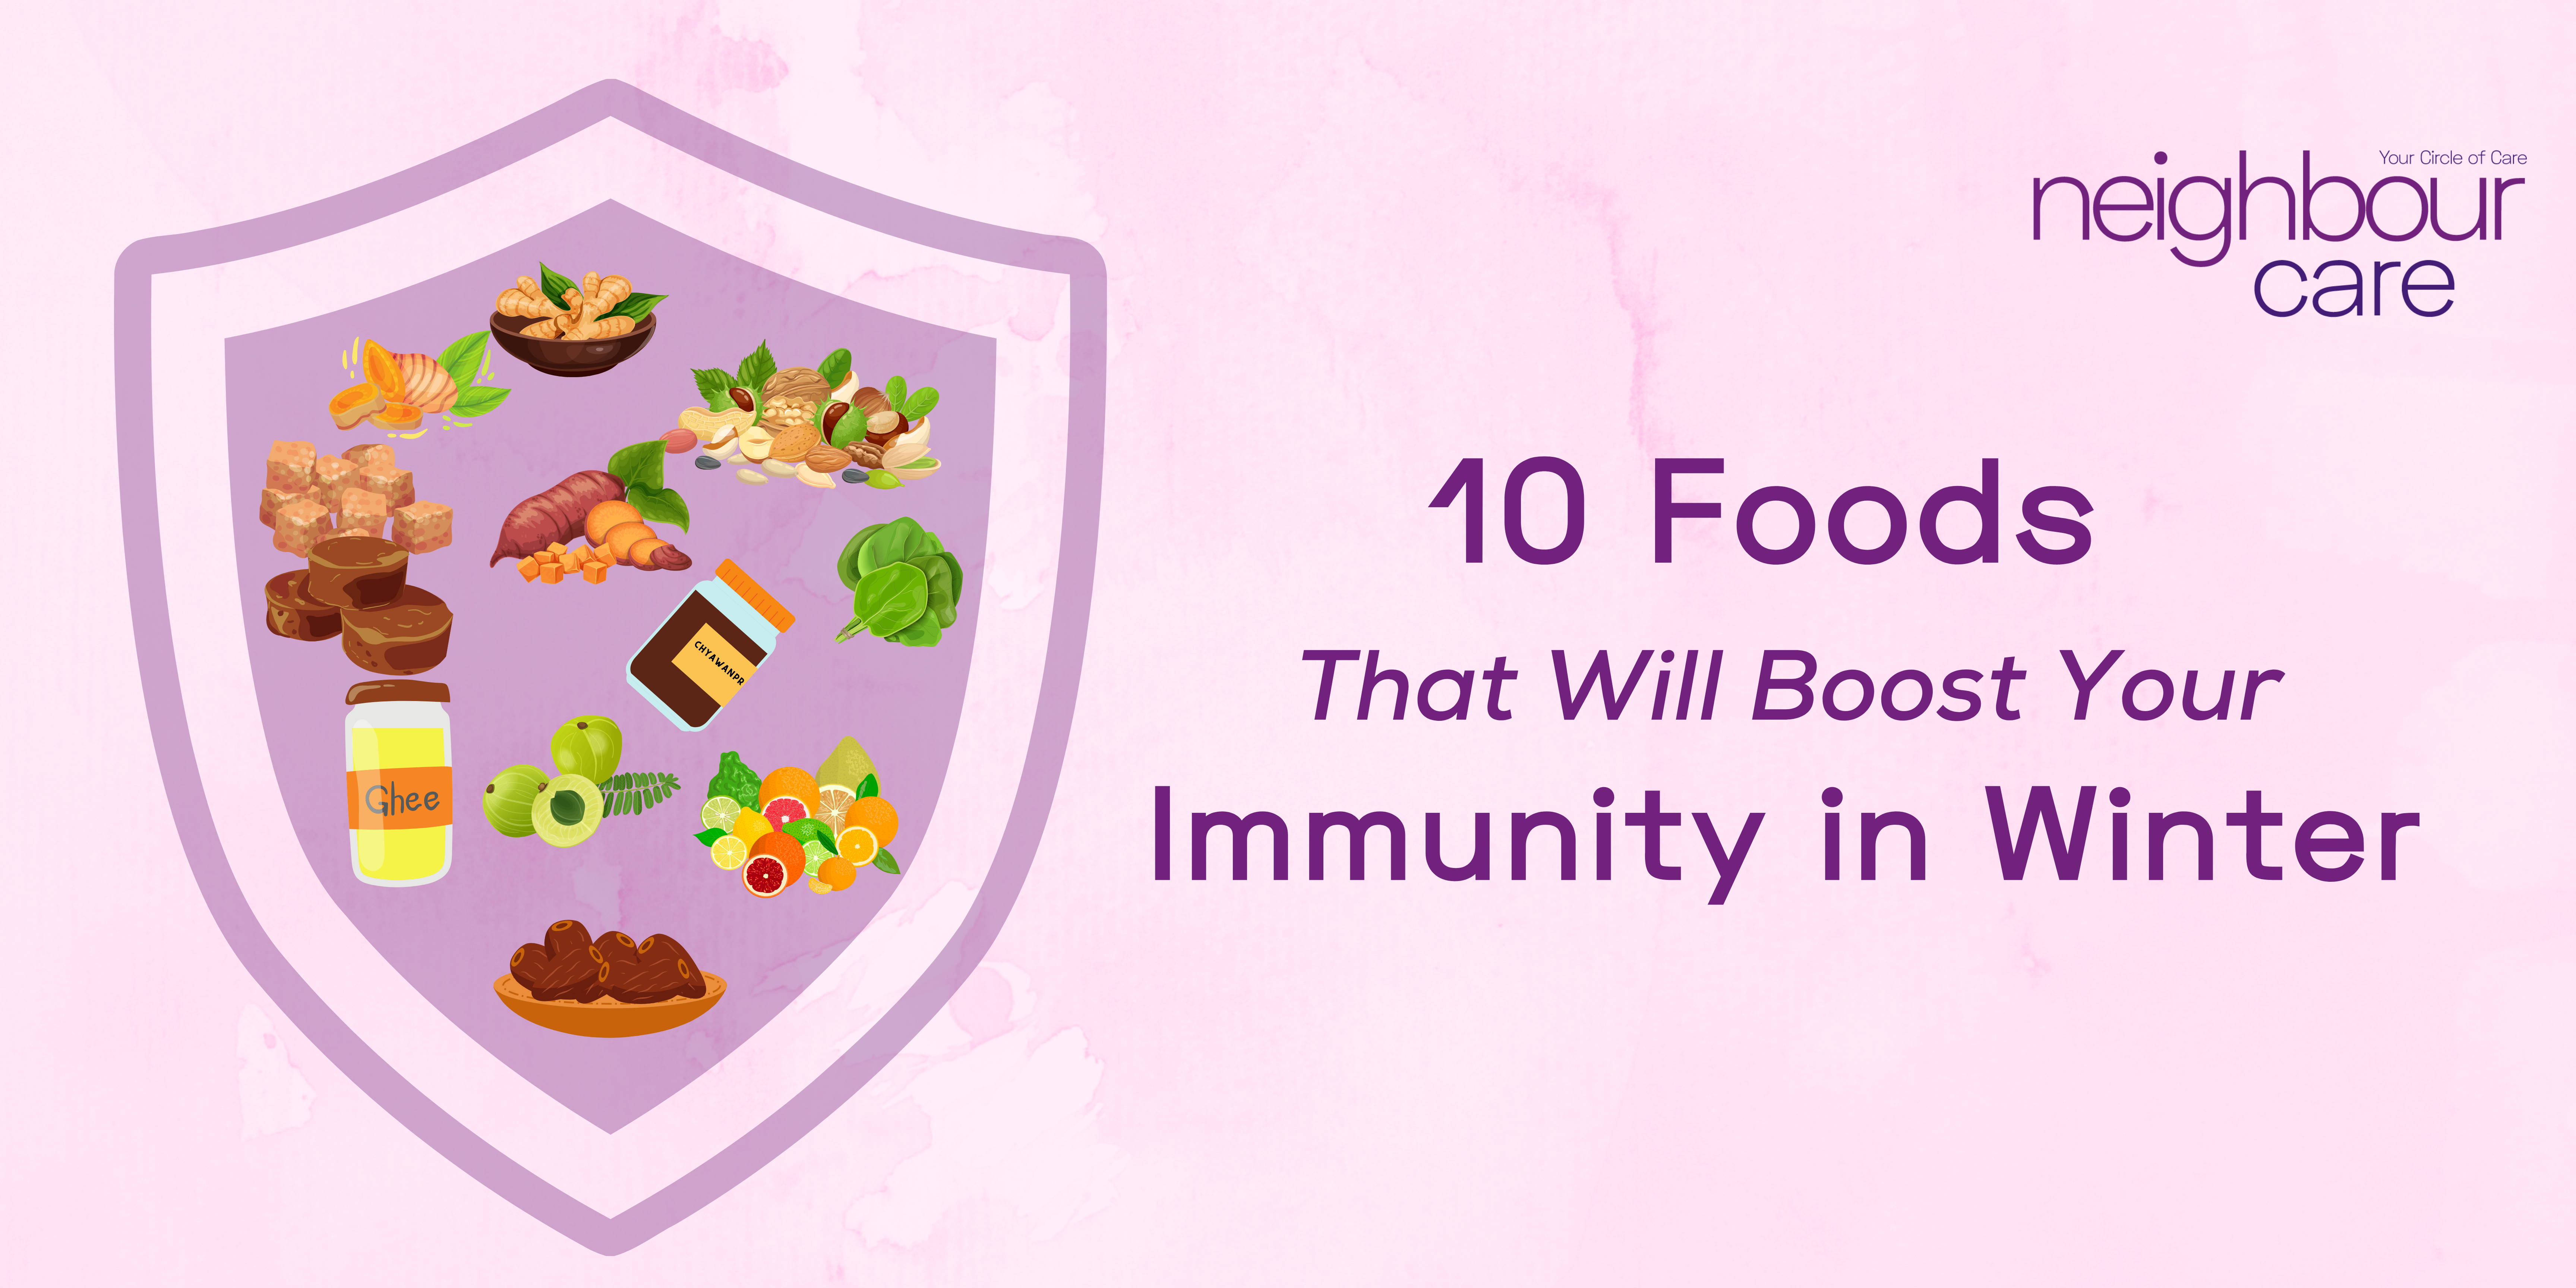 10 Foods That Will Boost Your Immunity in Winter